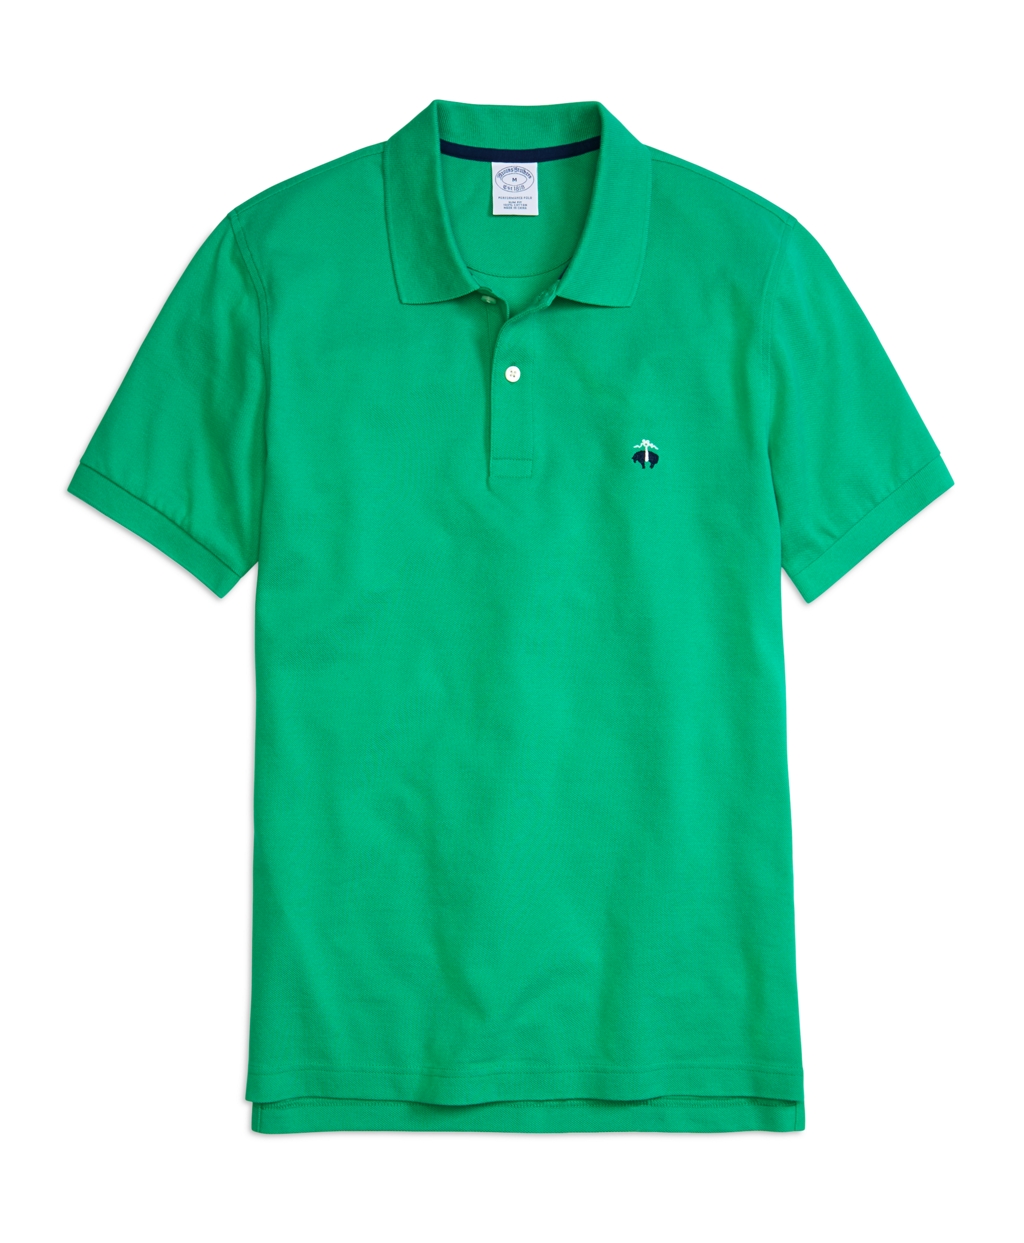 Brooks Brothers Golden Fleece® Slim Fit Performance Polo Shirt in Green ...